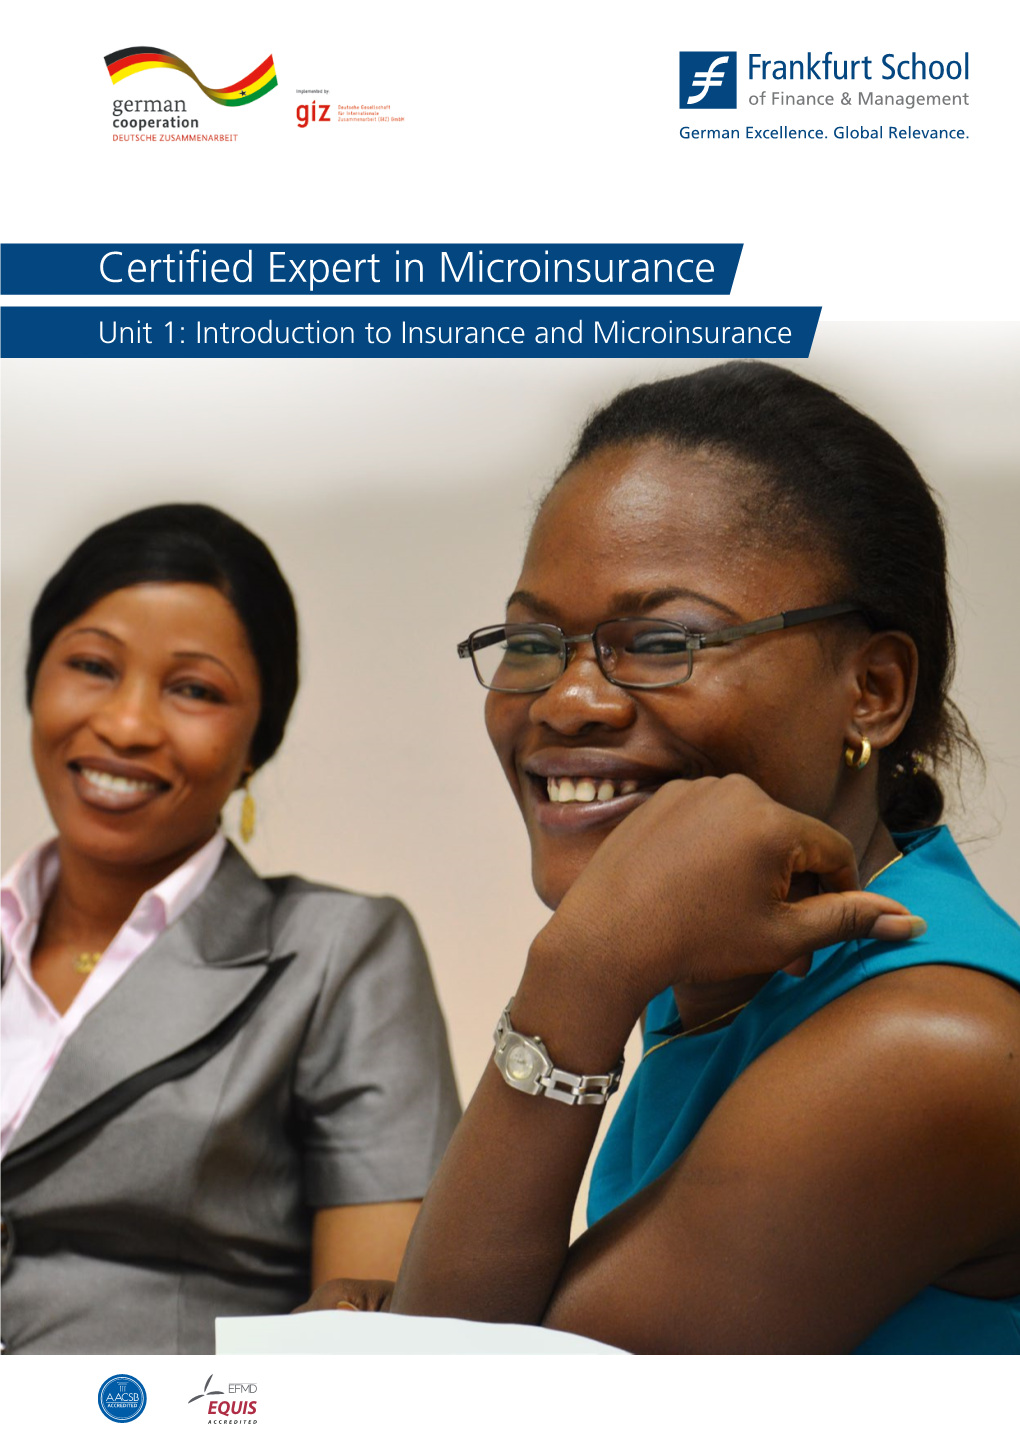 Certified Expert in Microinsurance Unit 1: Introduction to Insurance and Microinsurance